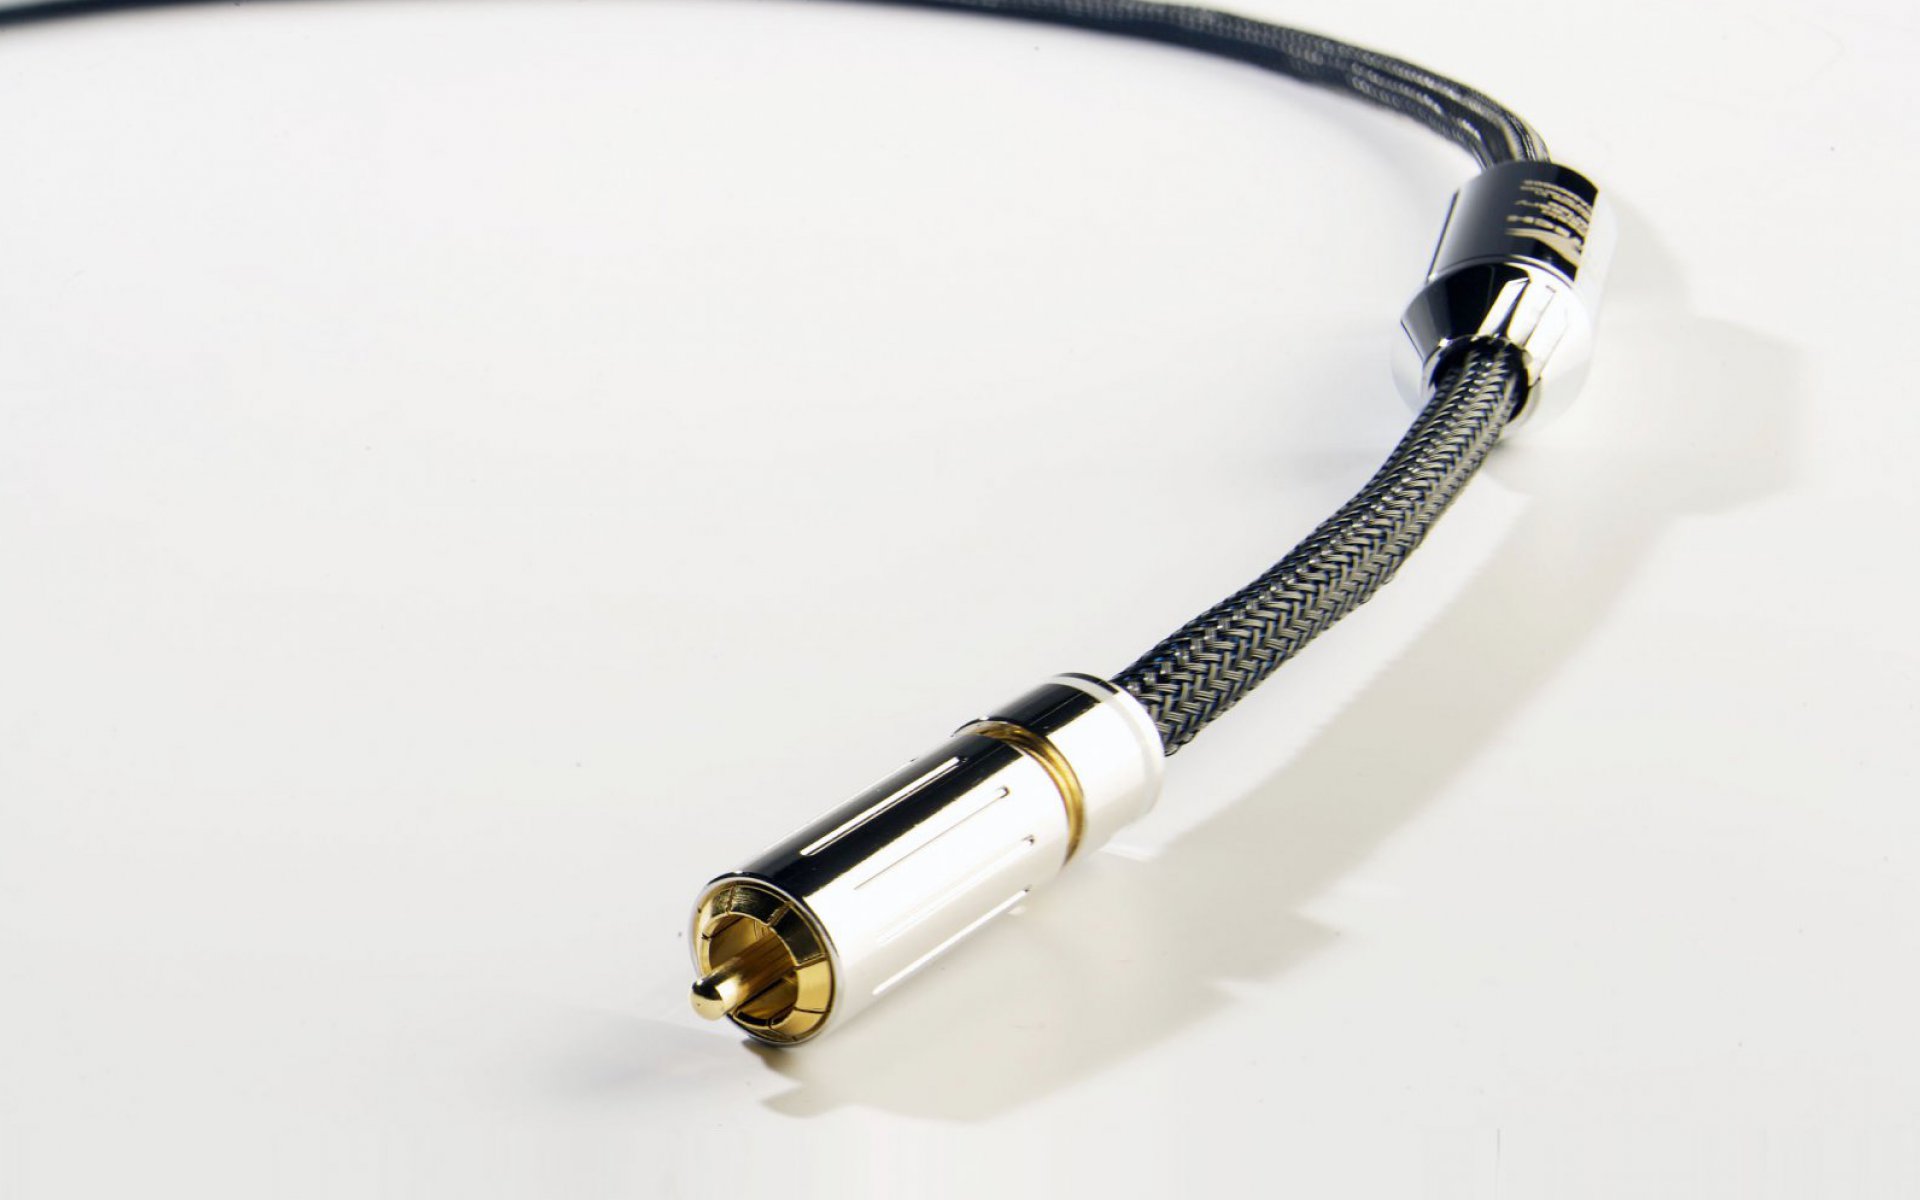 www.siltechcables.com